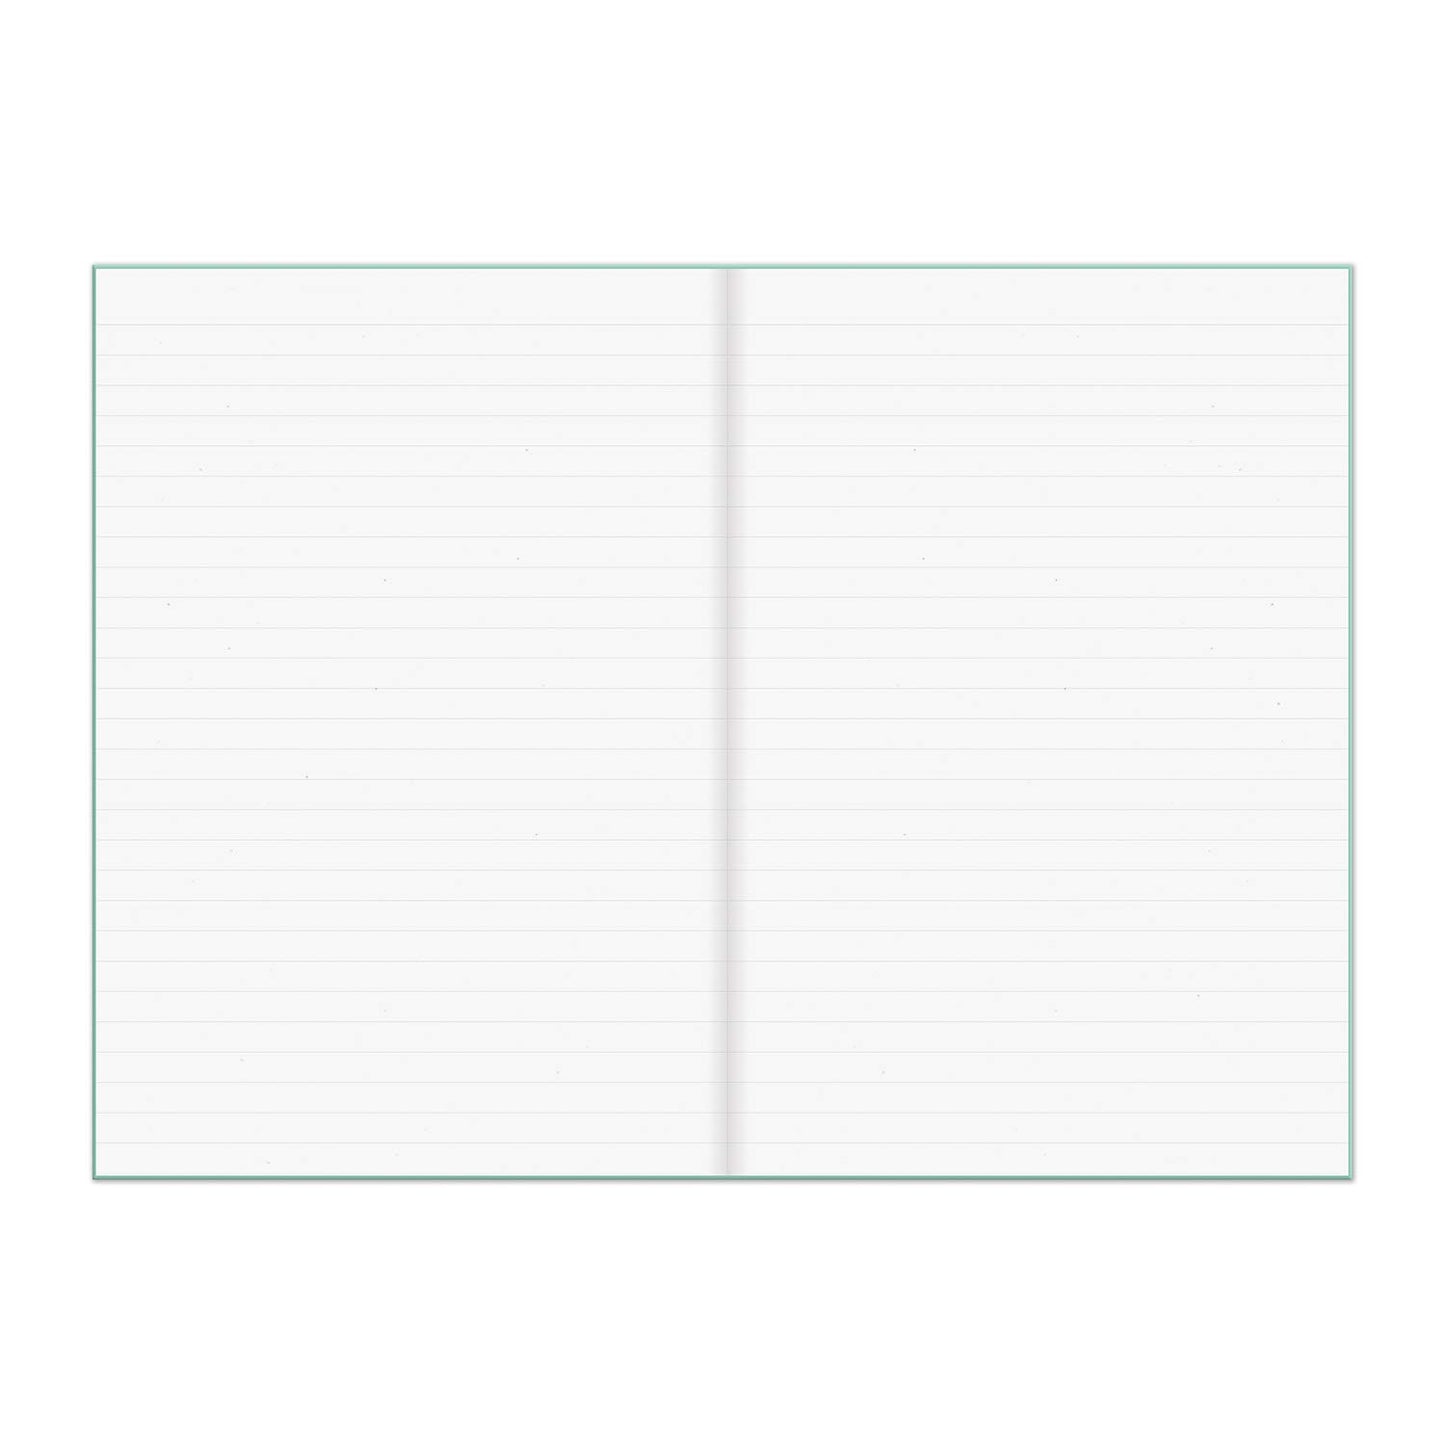 inside view of the vintage recording journal with lined paper on a white background